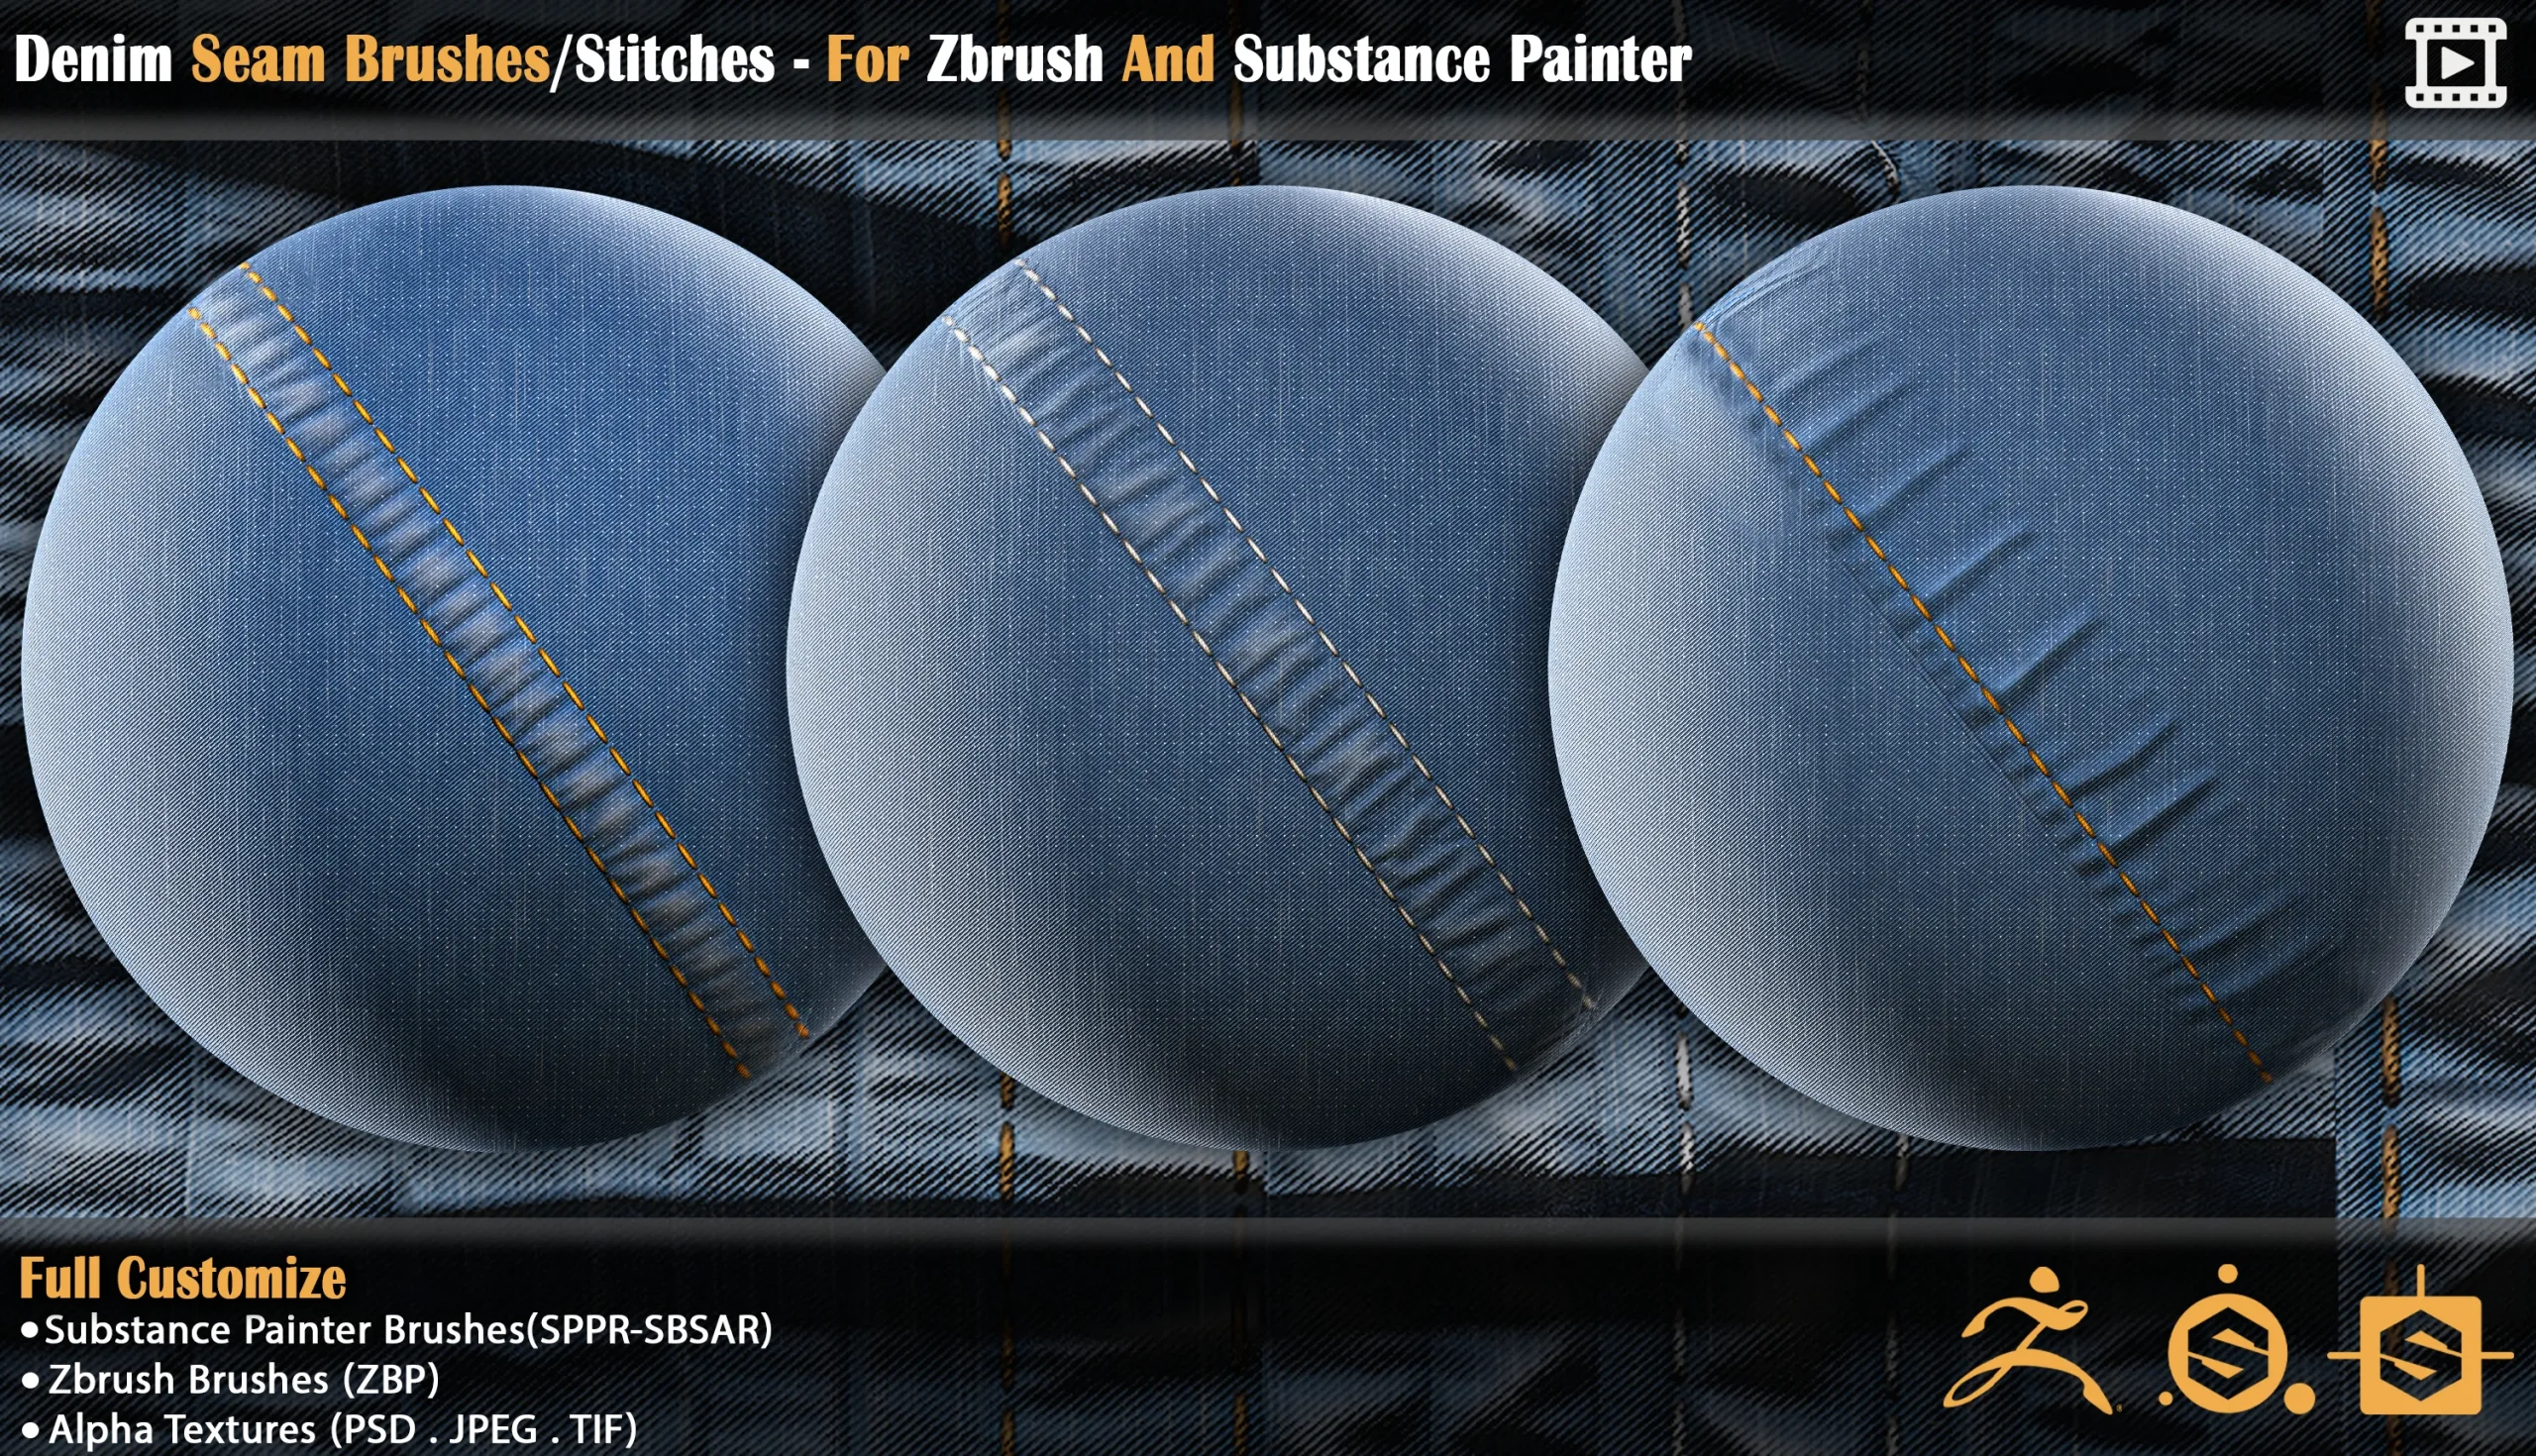 Denim Seam Brushes/Stitches - For Zbrush And Substance Painter